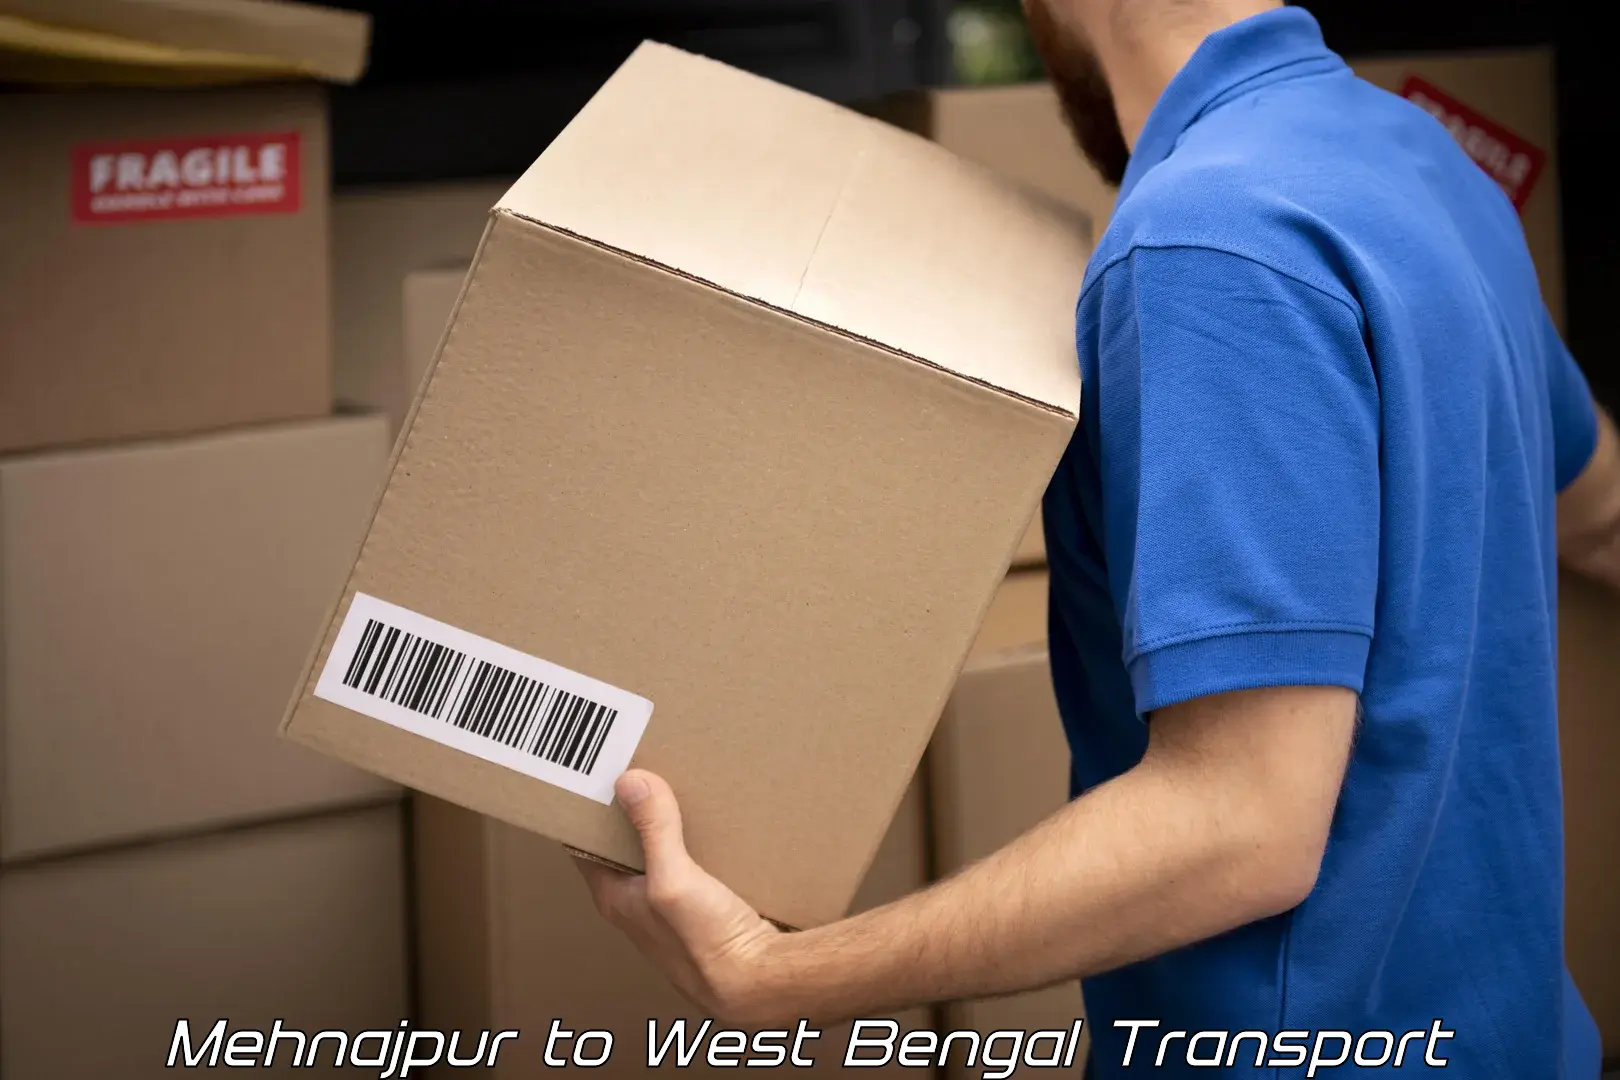 Container transport service Mehnajpur to West Bengal